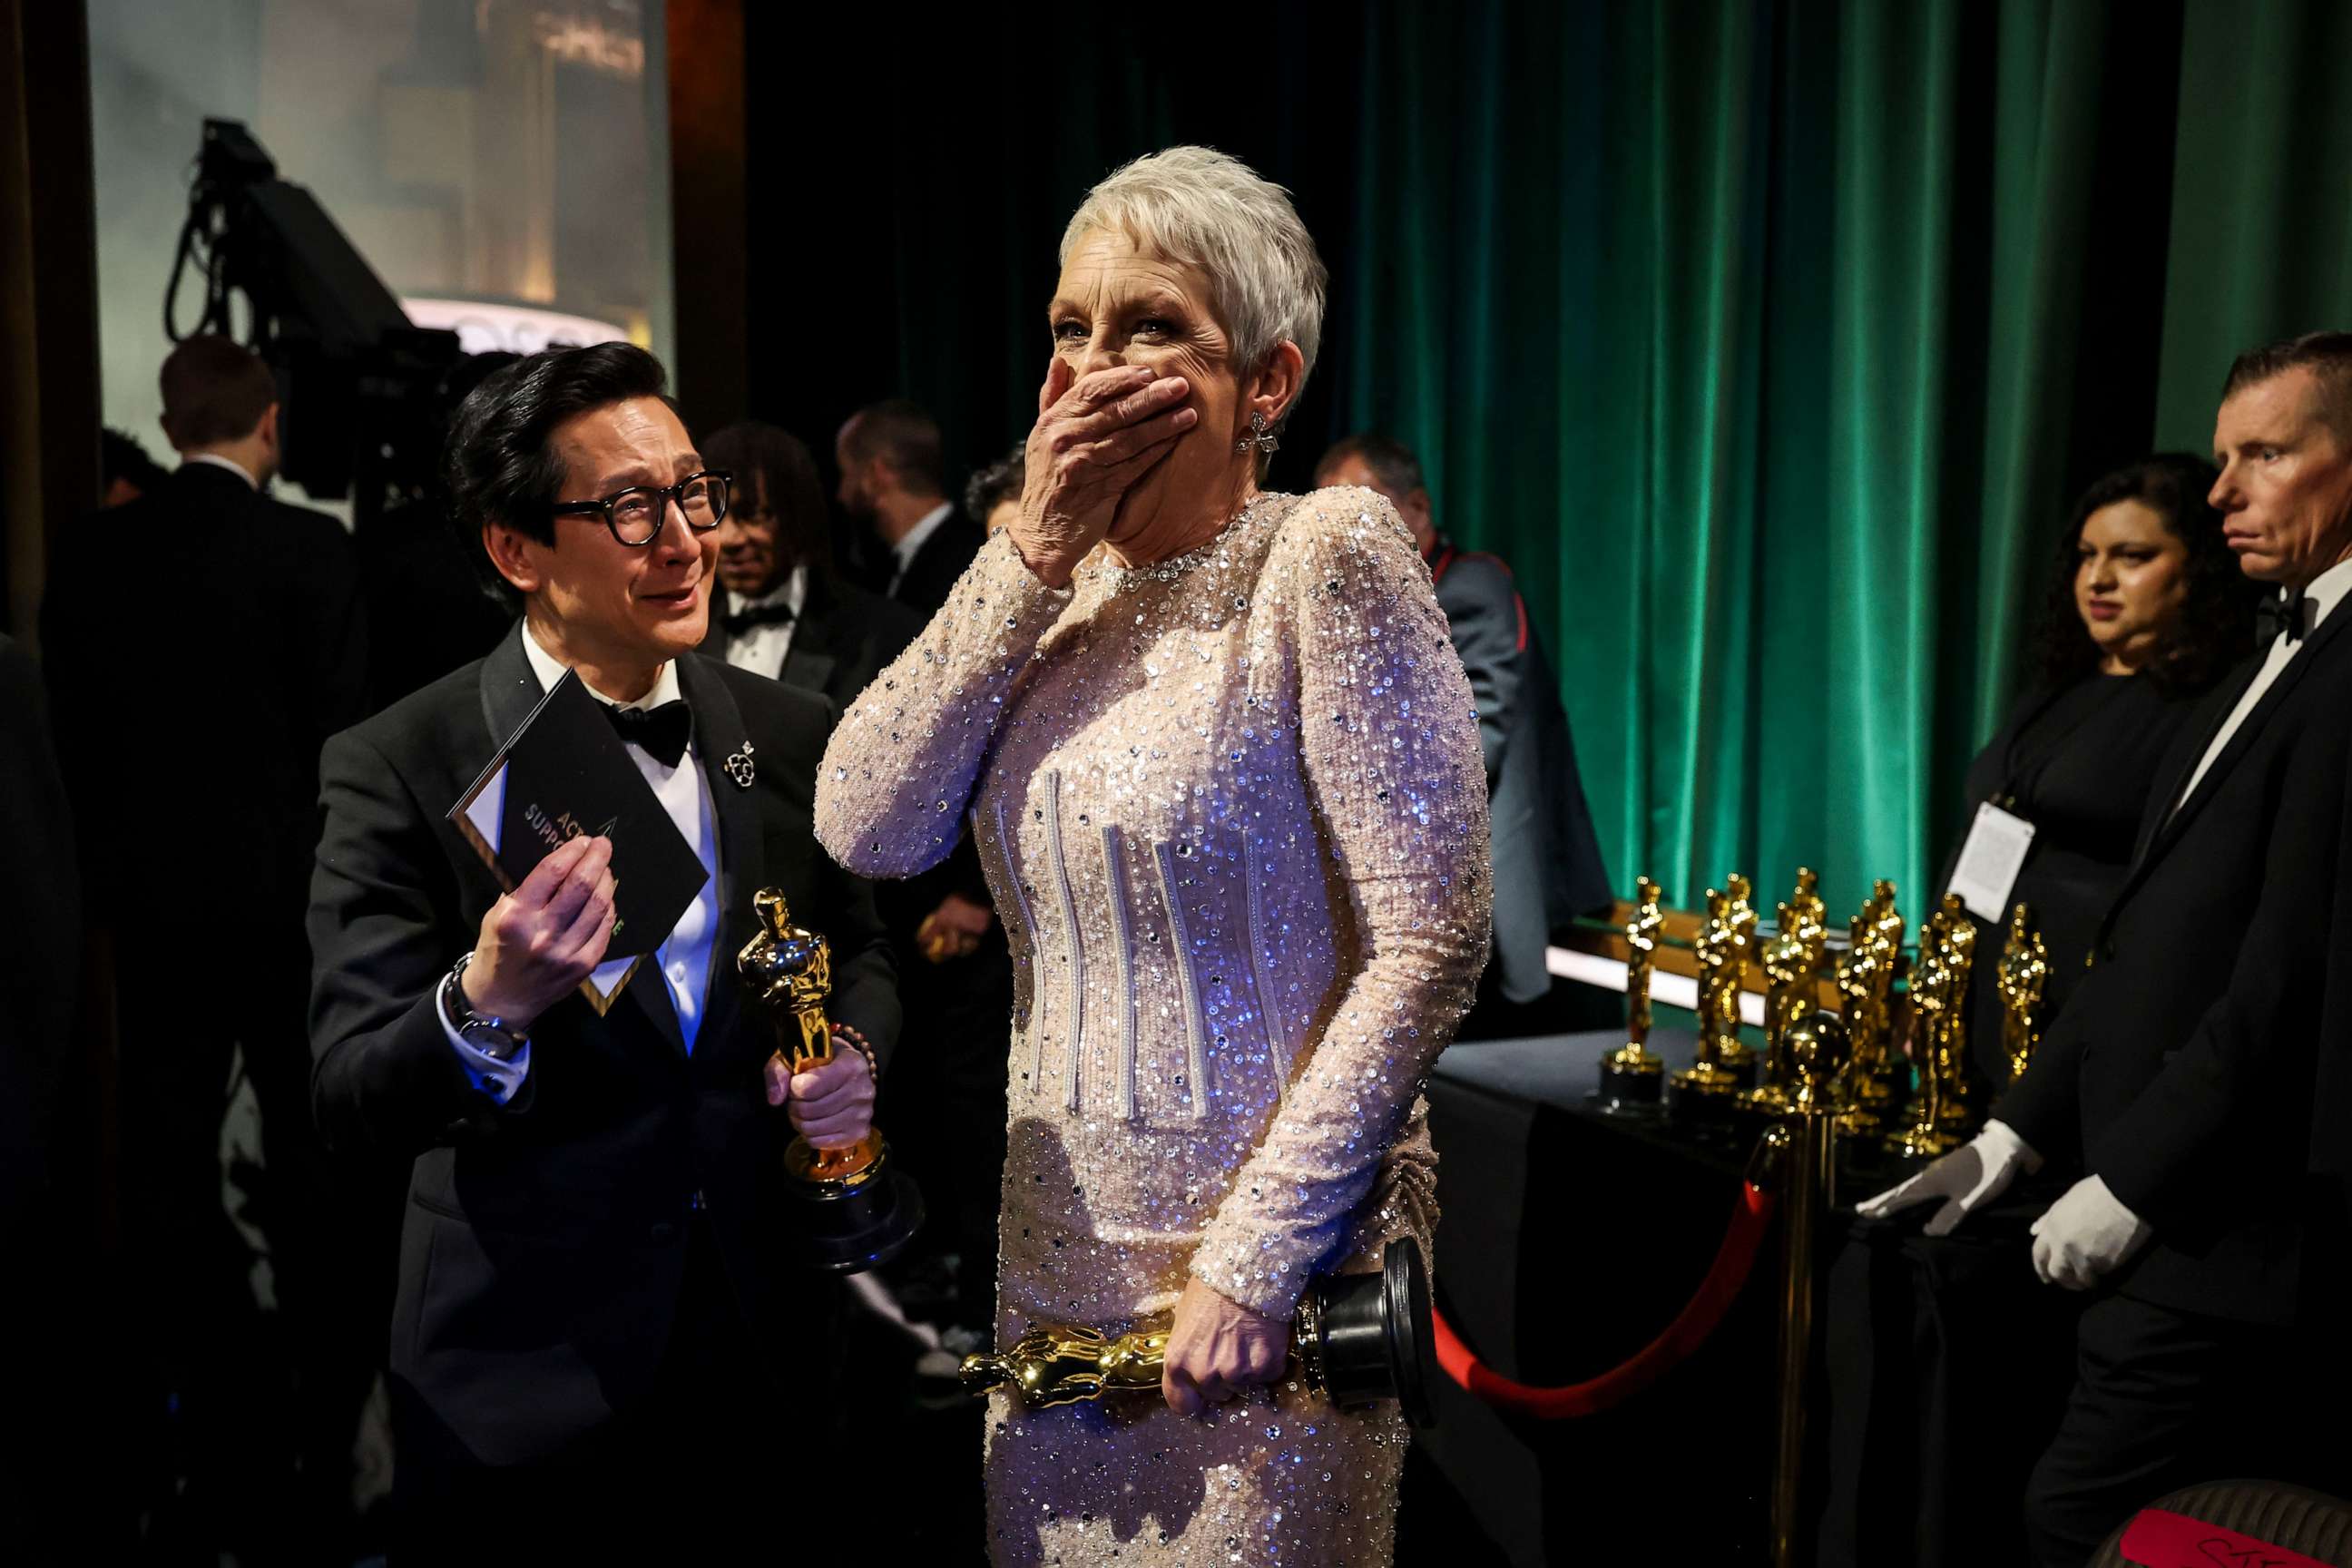 PHOTO: Jamie Lee Curtis, winner of Best Supporting Actress and Ke Huy Quan, winner of Best Actor In A Supporting Role award both for their roles in "Everything Everywhere All At Once, backstage at the 95th Academy Awards, Mar. 12, 2023, in Hollywood.